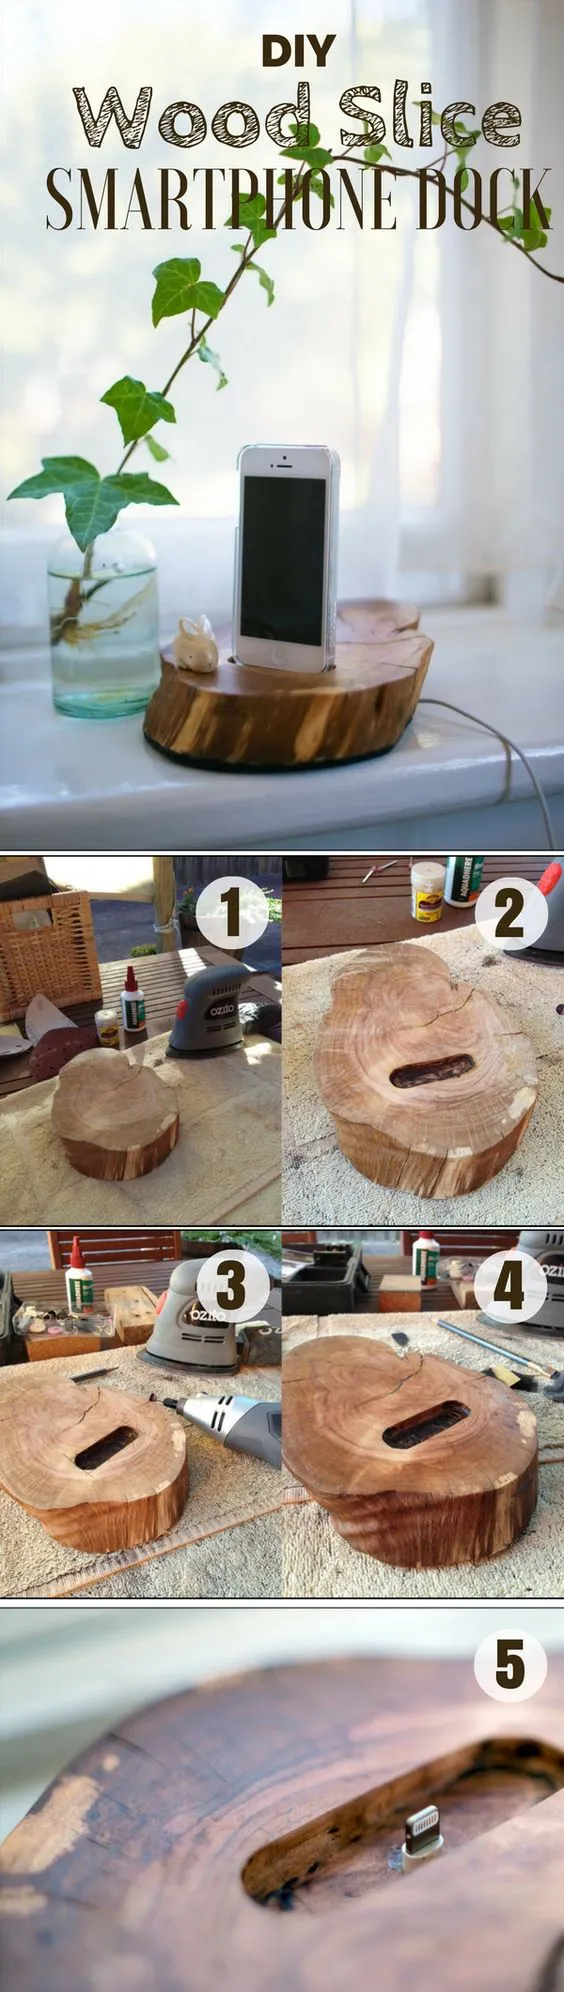 Check out how to build this easy DIY Wood Slice Smartphone Dock @istandarddesign: 